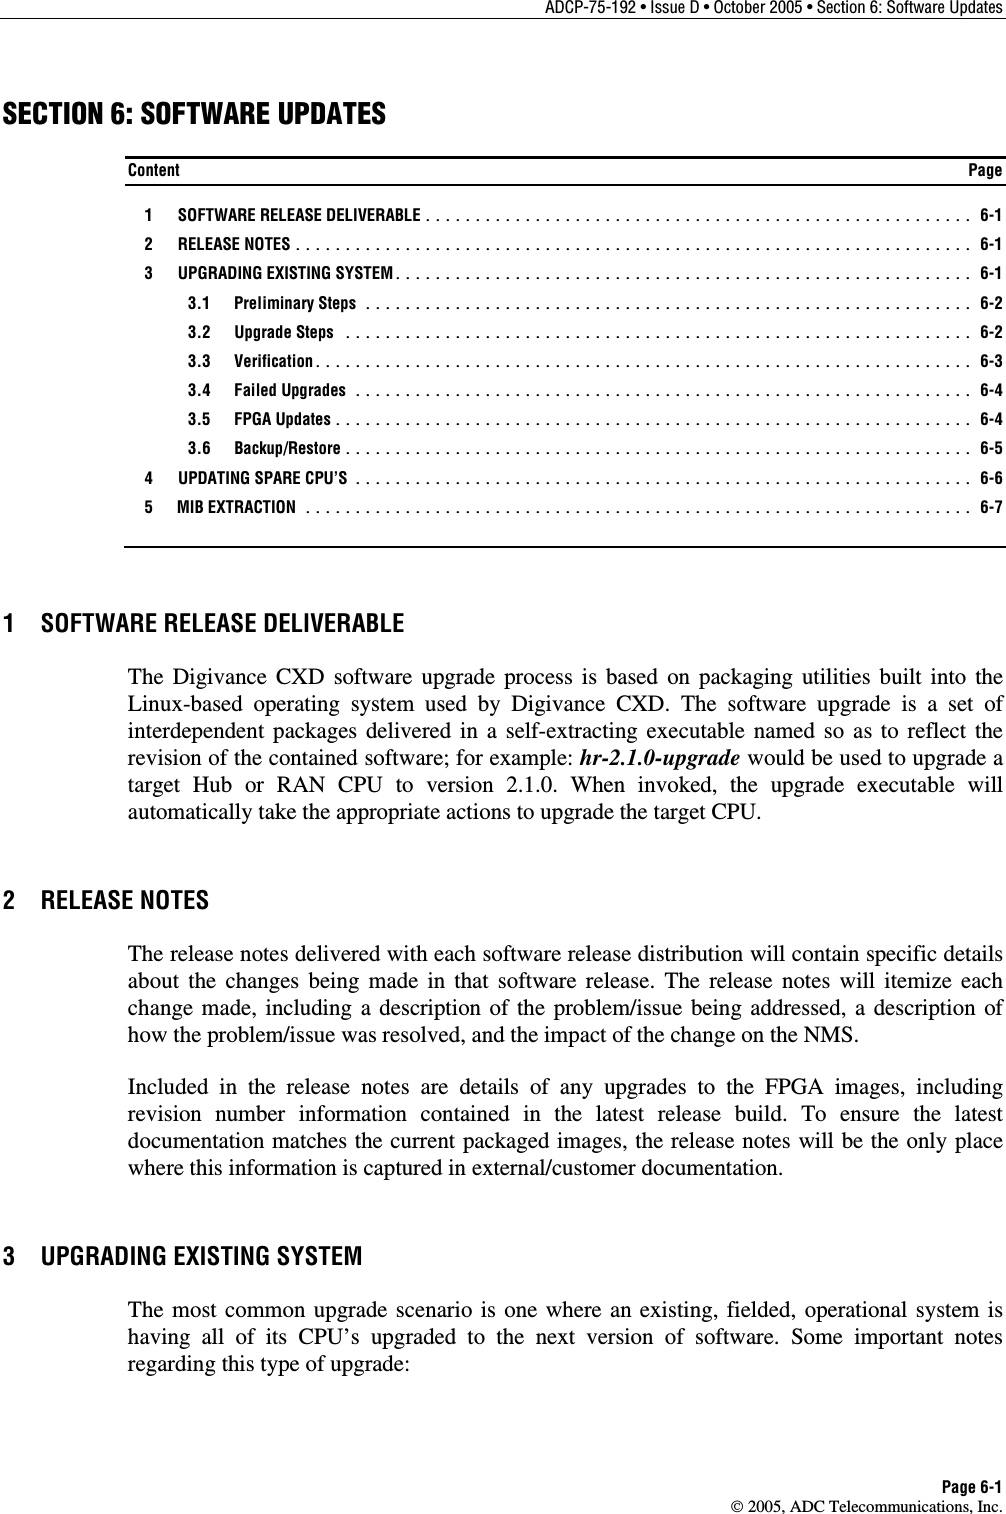 ADCP-75-192 • Issue D • October 2005 • Section 6: Software Updates Page 6-1  2005, ADC Telecommunications, Inc. SECTION 6: SOFTWARE UPDATES Content  Page  1  SOFTWARE RELEASE DELIVERABLE ....................................................... 6-1  2  RELEASE NOTES .................................................................... 6-1  3  UPGRADING EXISTING SYSTEM.......................................................... 6-1  3.1 Preliminary Steps ............................................................. 6-2  3.2 Upgrade Steps ............................................................... 6-2  3.3 Verification.................................................................. 6-3  3.4 Failed Upgrades .............................................................. 6-4  3.5 FPGA Updates................................................................ 6-4  3.6 Backup/Restore ............................................................... 6-5   4  UPDATING SPARE CPU’S .............................................................. 6-6  5  MIB EXTRACTION ................................................................... 6-7 1  SOFTWARE RELEASE DELIVERABLE The Digivance CXD software upgrade process is based on packaging utilities built into the Linux-based operating system used by Digivance CXD. The software upgrade is a set of interdependent packages delivered in a self-extracting executable named so as to reflect the revision of the contained software; for example: hr-2.1.0-upgrade would be used to upgrade a target Hub or RAN CPU to version 2.1.0. When invoked, the upgrade executable will automatically take the appropriate actions to upgrade the target CPU.  2 RELEASE NOTES The release notes delivered with each software release distribution will contain specific details about the changes being made in that software release. The release notes will itemize each change made, including a description of the problem/issue being addressed, a description of how the problem/issue was resolved, and the impact of the change on the NMS.  Included in the release notes are details of any upgrades to the FPGA images, including revision number information contained in the latest release build. To ensure the latest documentation matches the current packaged images, the release notes will be the only place where this information is captured in external/customer documentation.  3  UPGRADING EXISTING SYSTEM The most common upgrade scenario is one where an existing, fielded, operational system is having all of its CPU’s upgraded to the next version of software. Some important notes regarding this type of upgrade: 